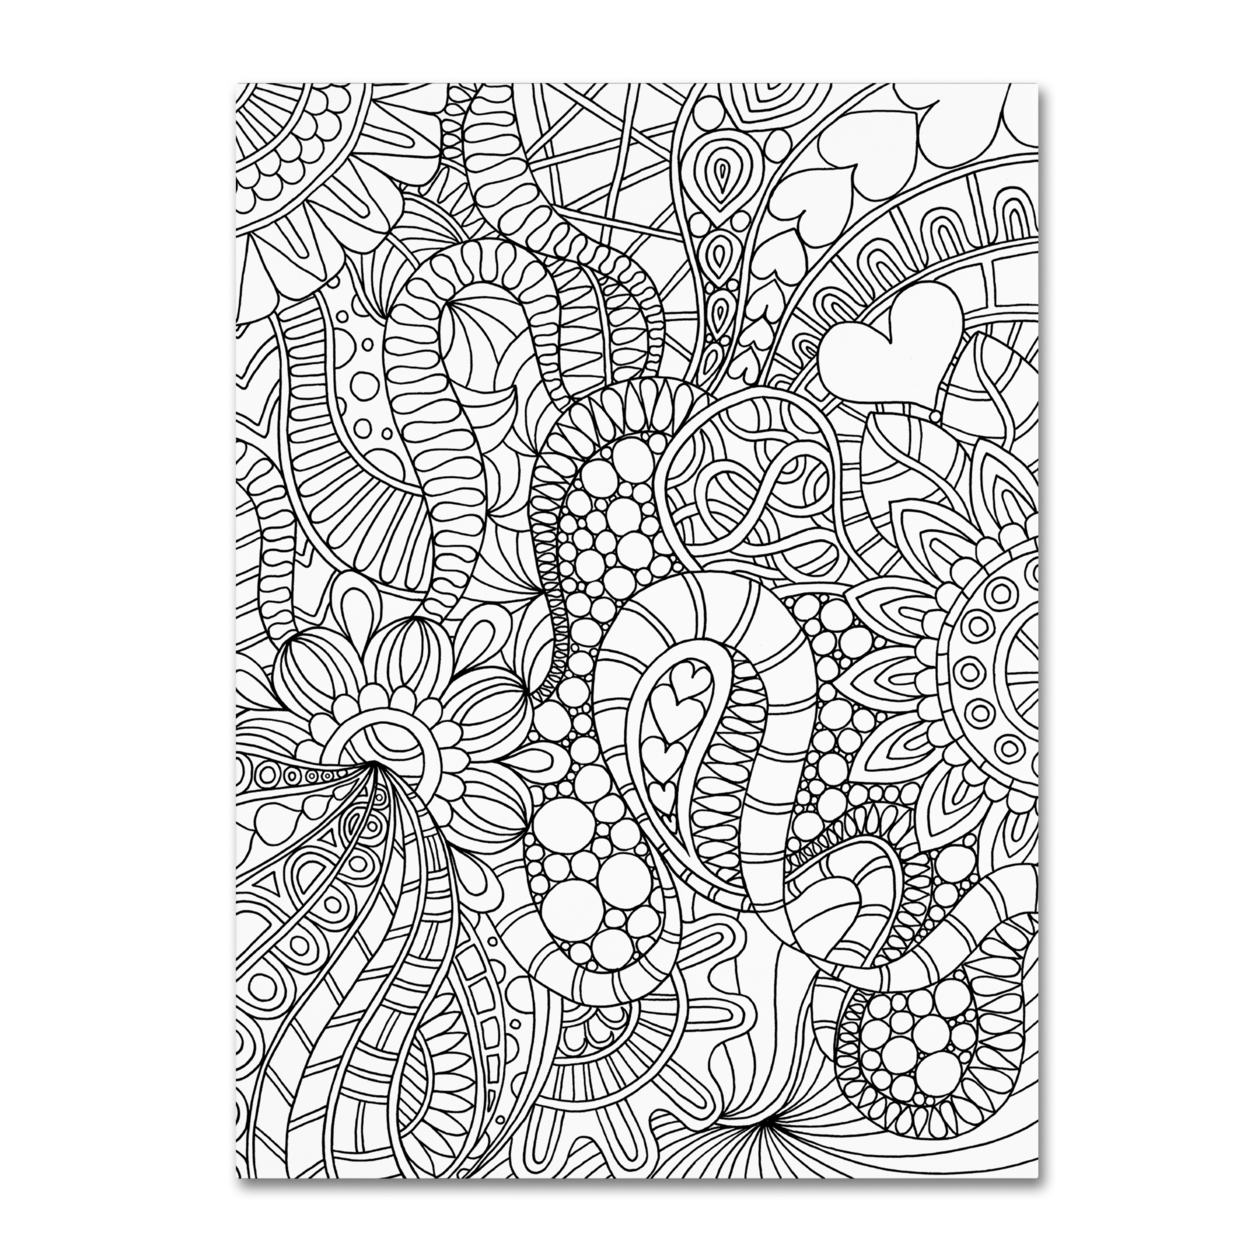 Kathy G. Ahrens 'Mixed Coloring Book 62' Canvas Wall Art 35 X 47 Inches